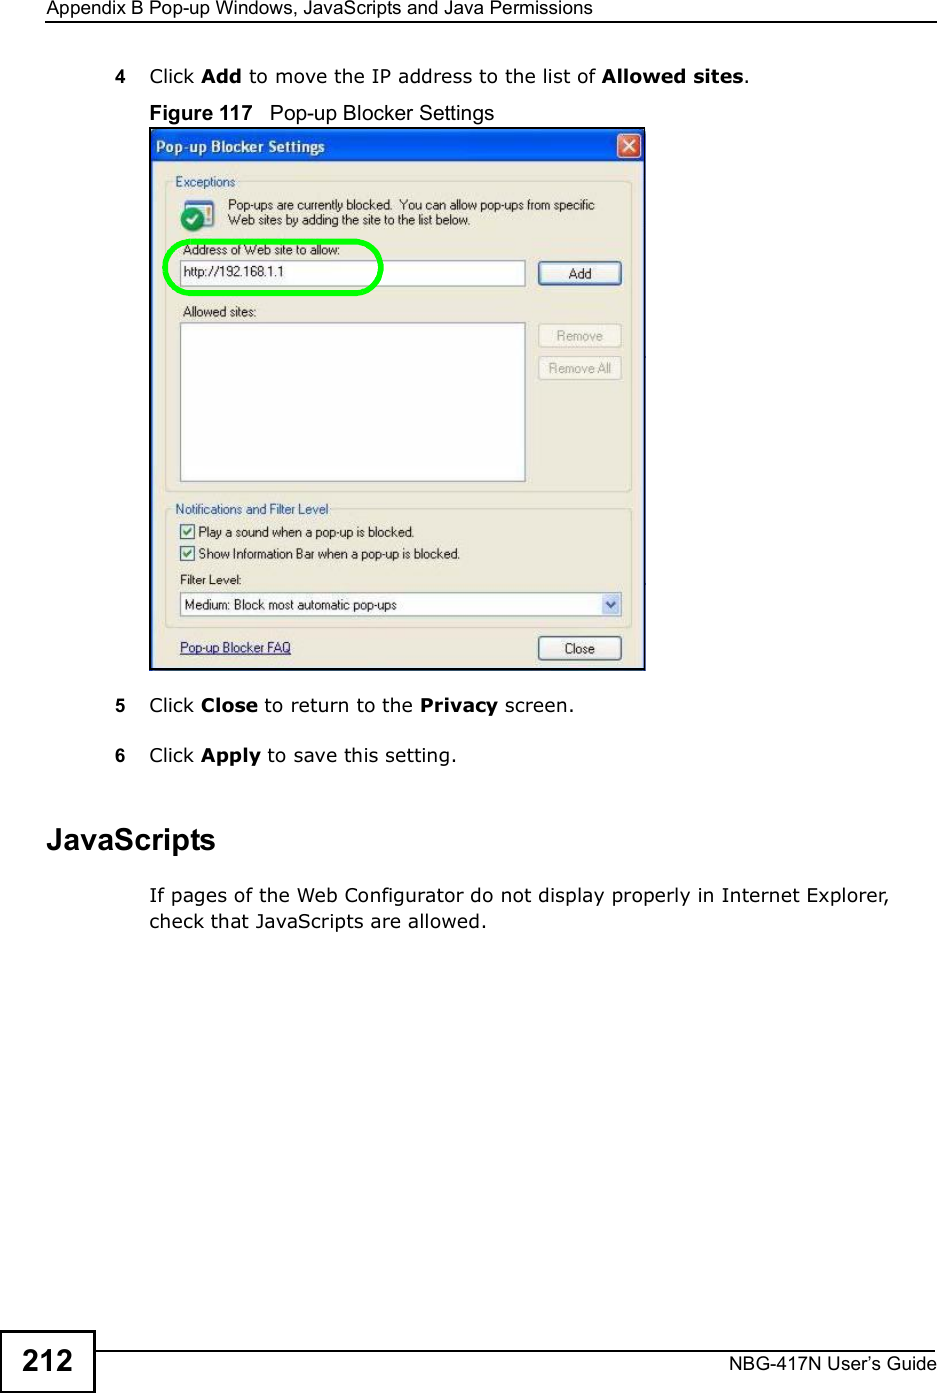 Appendix BPop-up Windows, JavaScripts and Java PermissionsNBG-417N User s Guide2124Click Add to move the IP address to the list of Allowed sites.Figure 117   Pop-up Blocker Settings5Click Close to return to the Privacy screen. 6Click Apply to save this setting. JavaScriptsIf pages of the Web Configurator do not display properly in Internet Explorer, check that JavaScripts are allowed. 